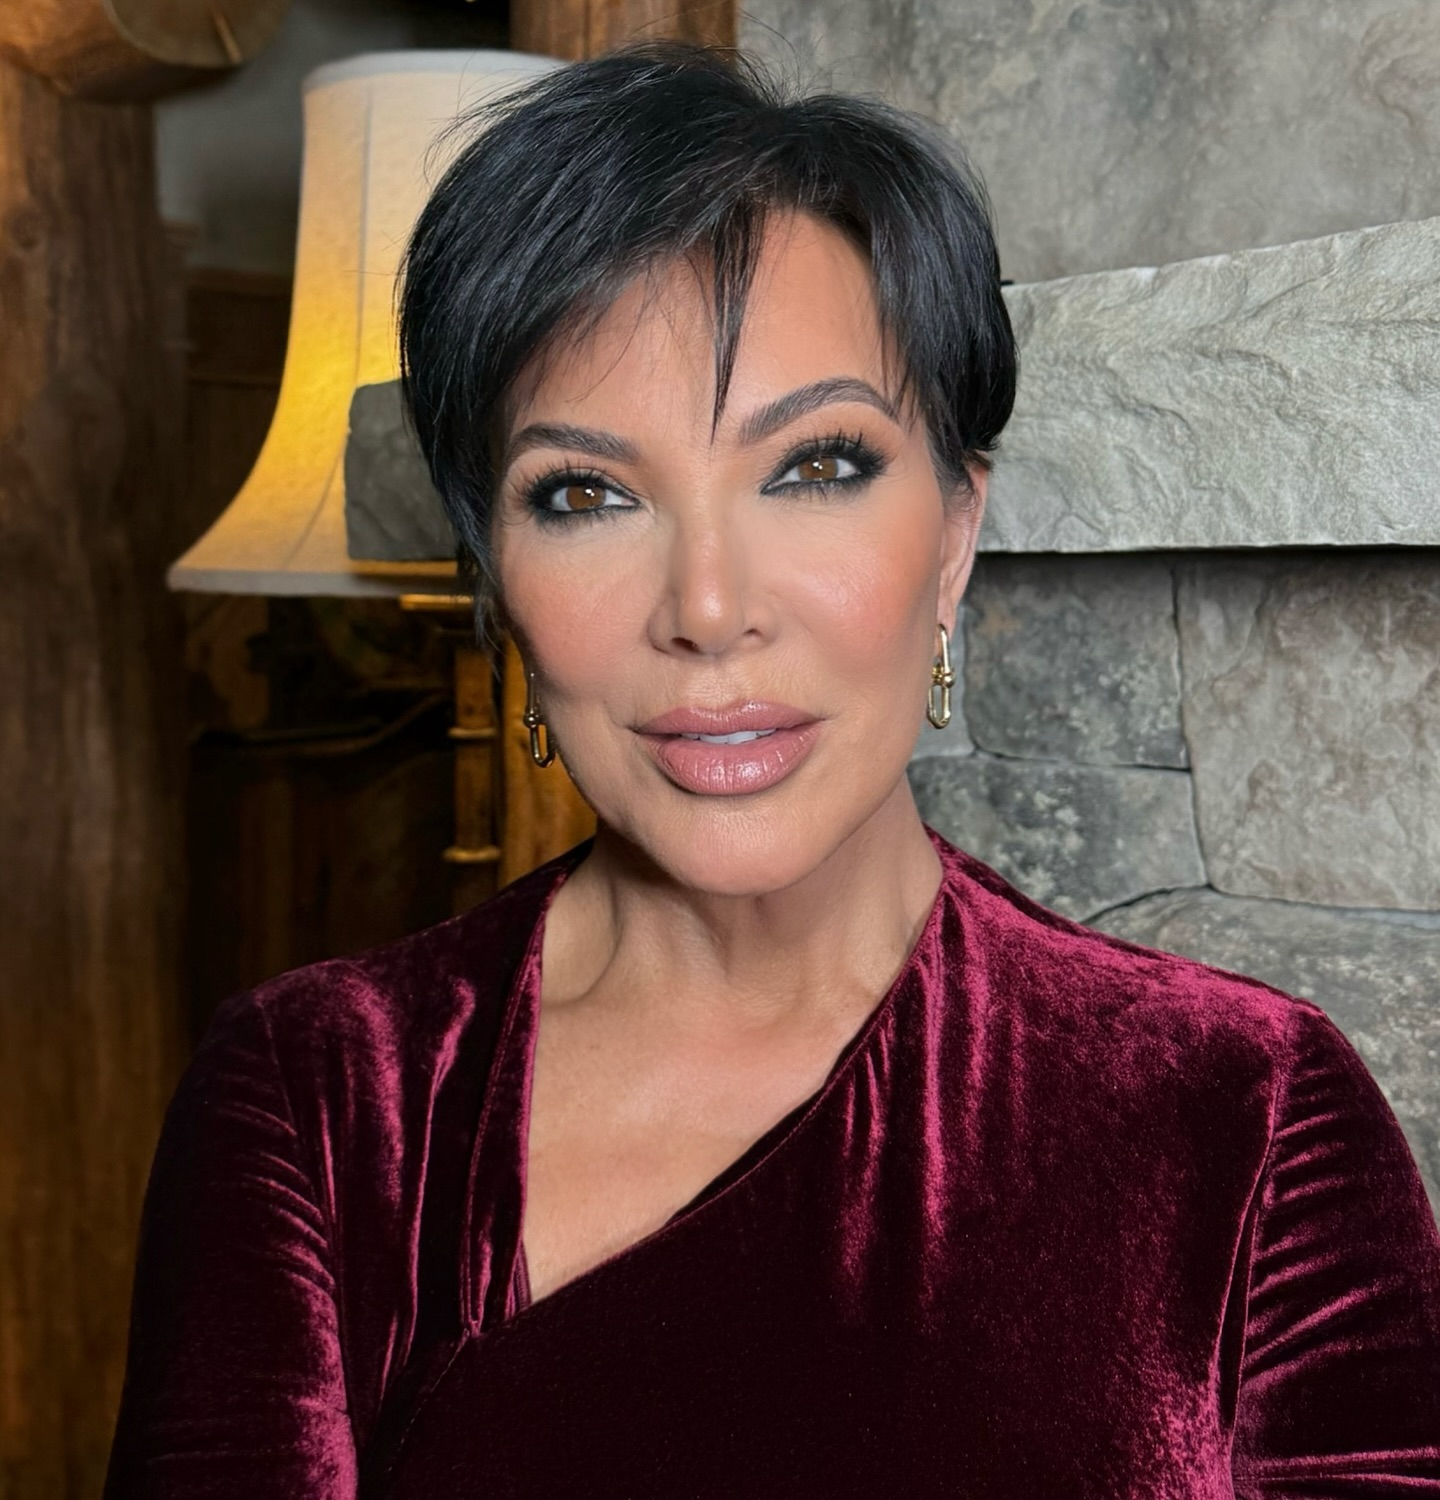 Kris Jenner, seen in a pic from her Instagram feed, is 68 and is a grandmother to 13 children